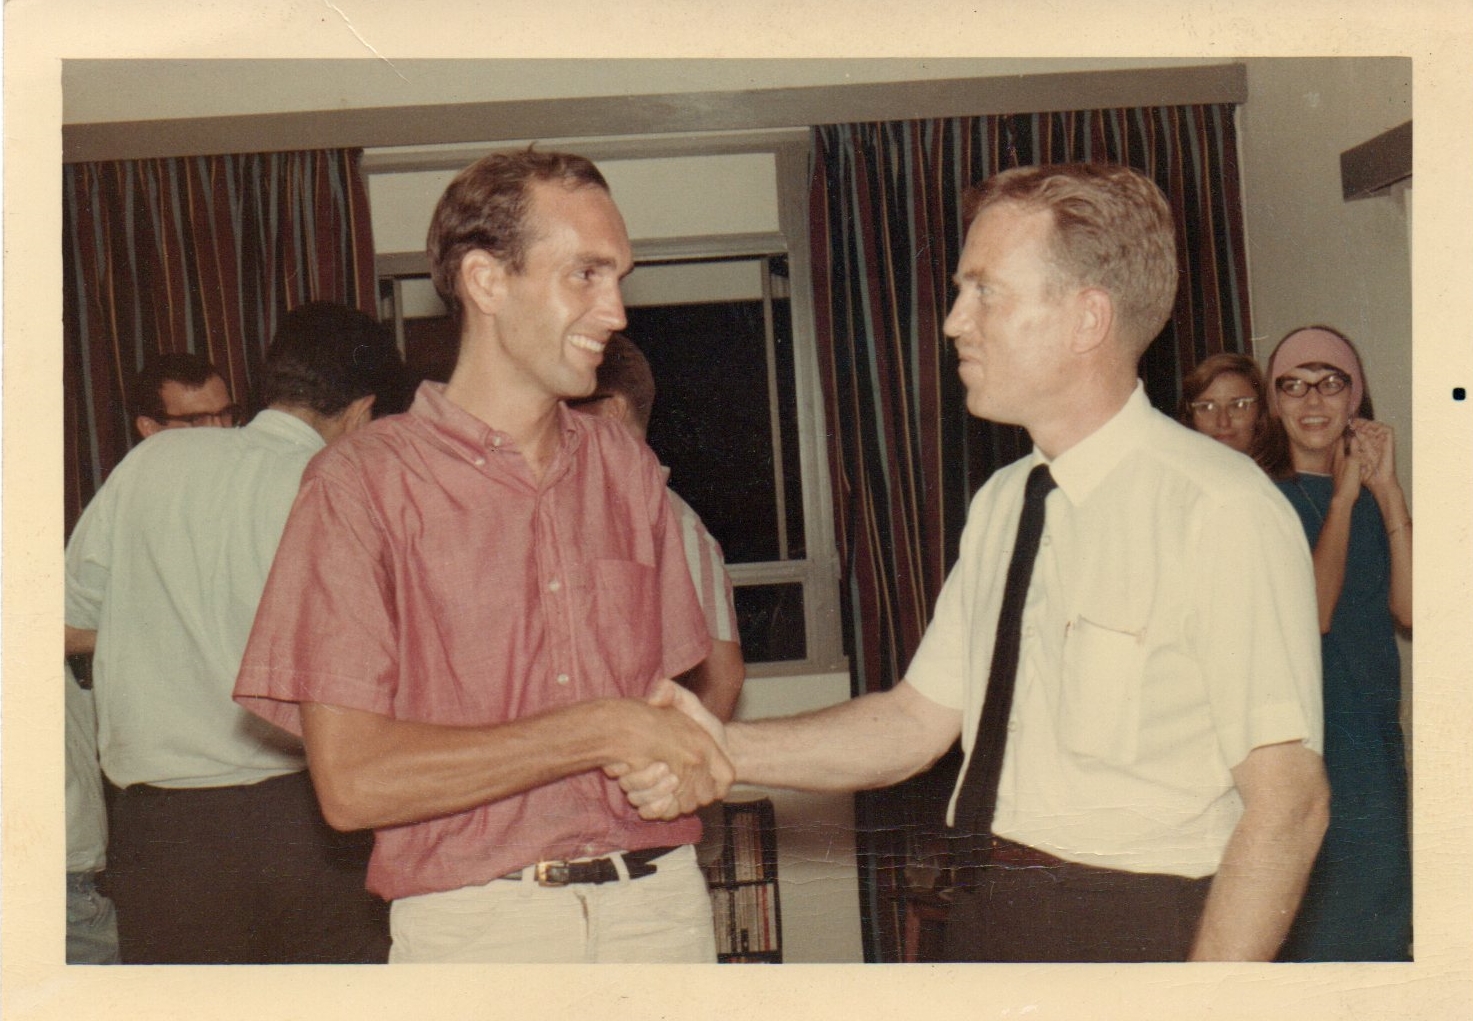 Jerry with PC Director Jack Vaughn